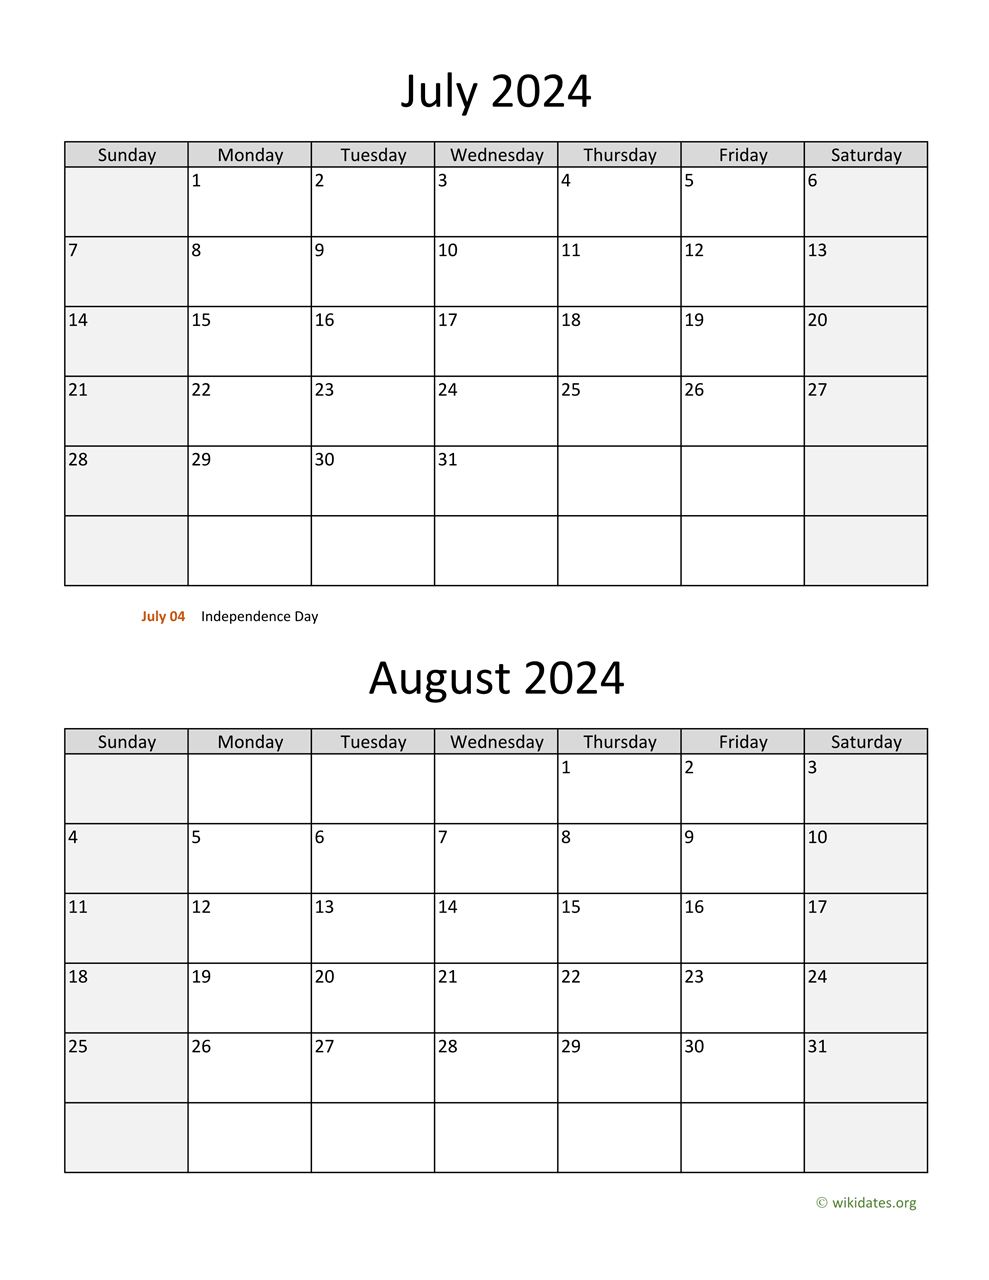 July And August 2024 Calendar | Wikidates for Printable Calendar 2024 June July August